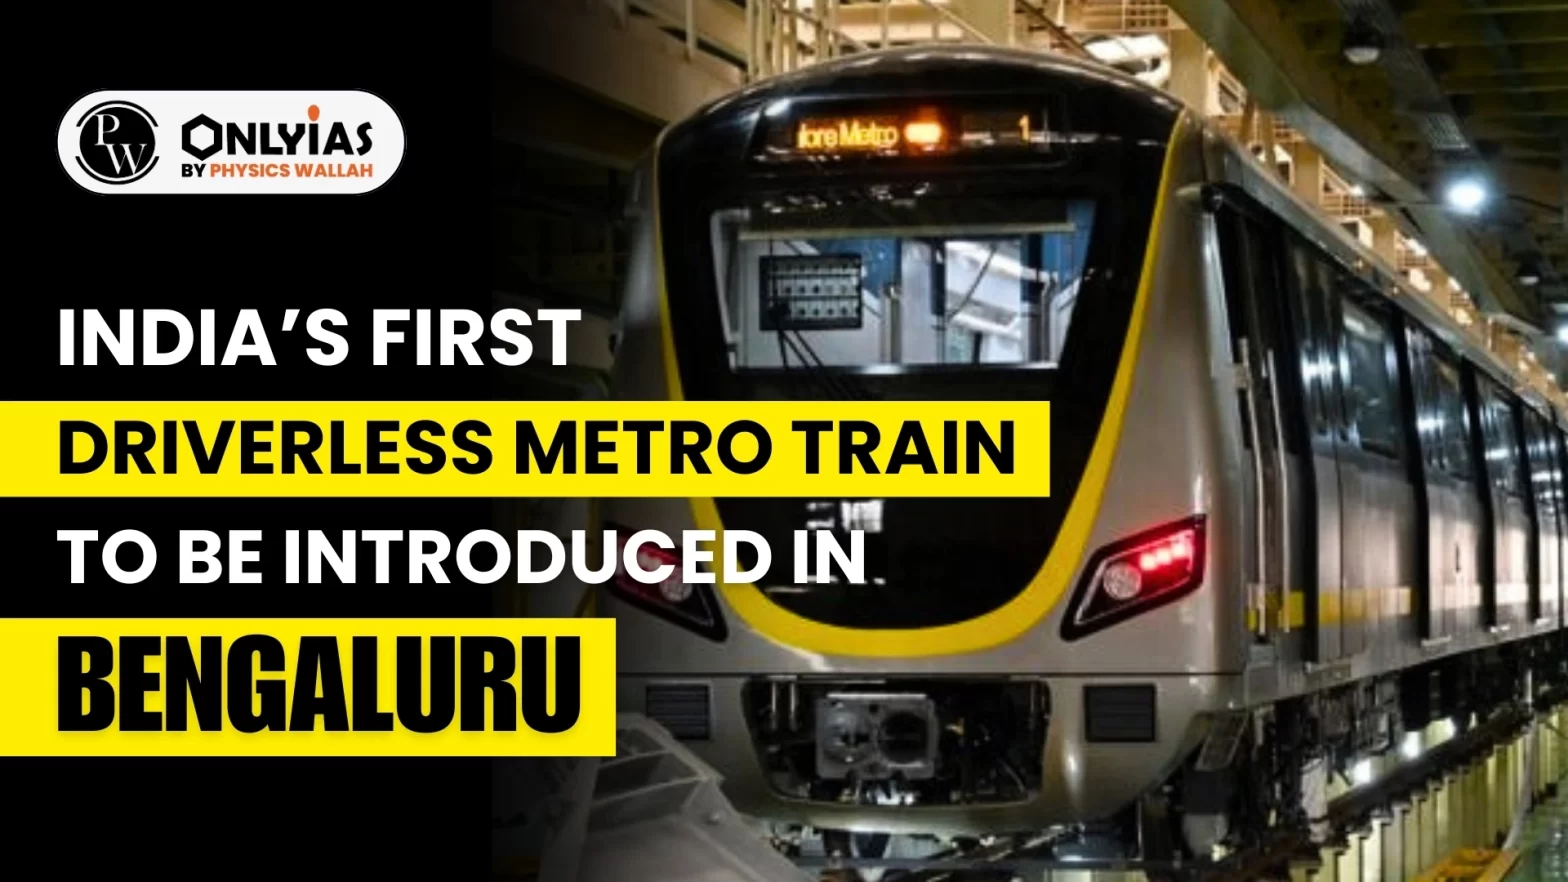 India’s First Driverless Metro Train to be Introduced in Bengaluru